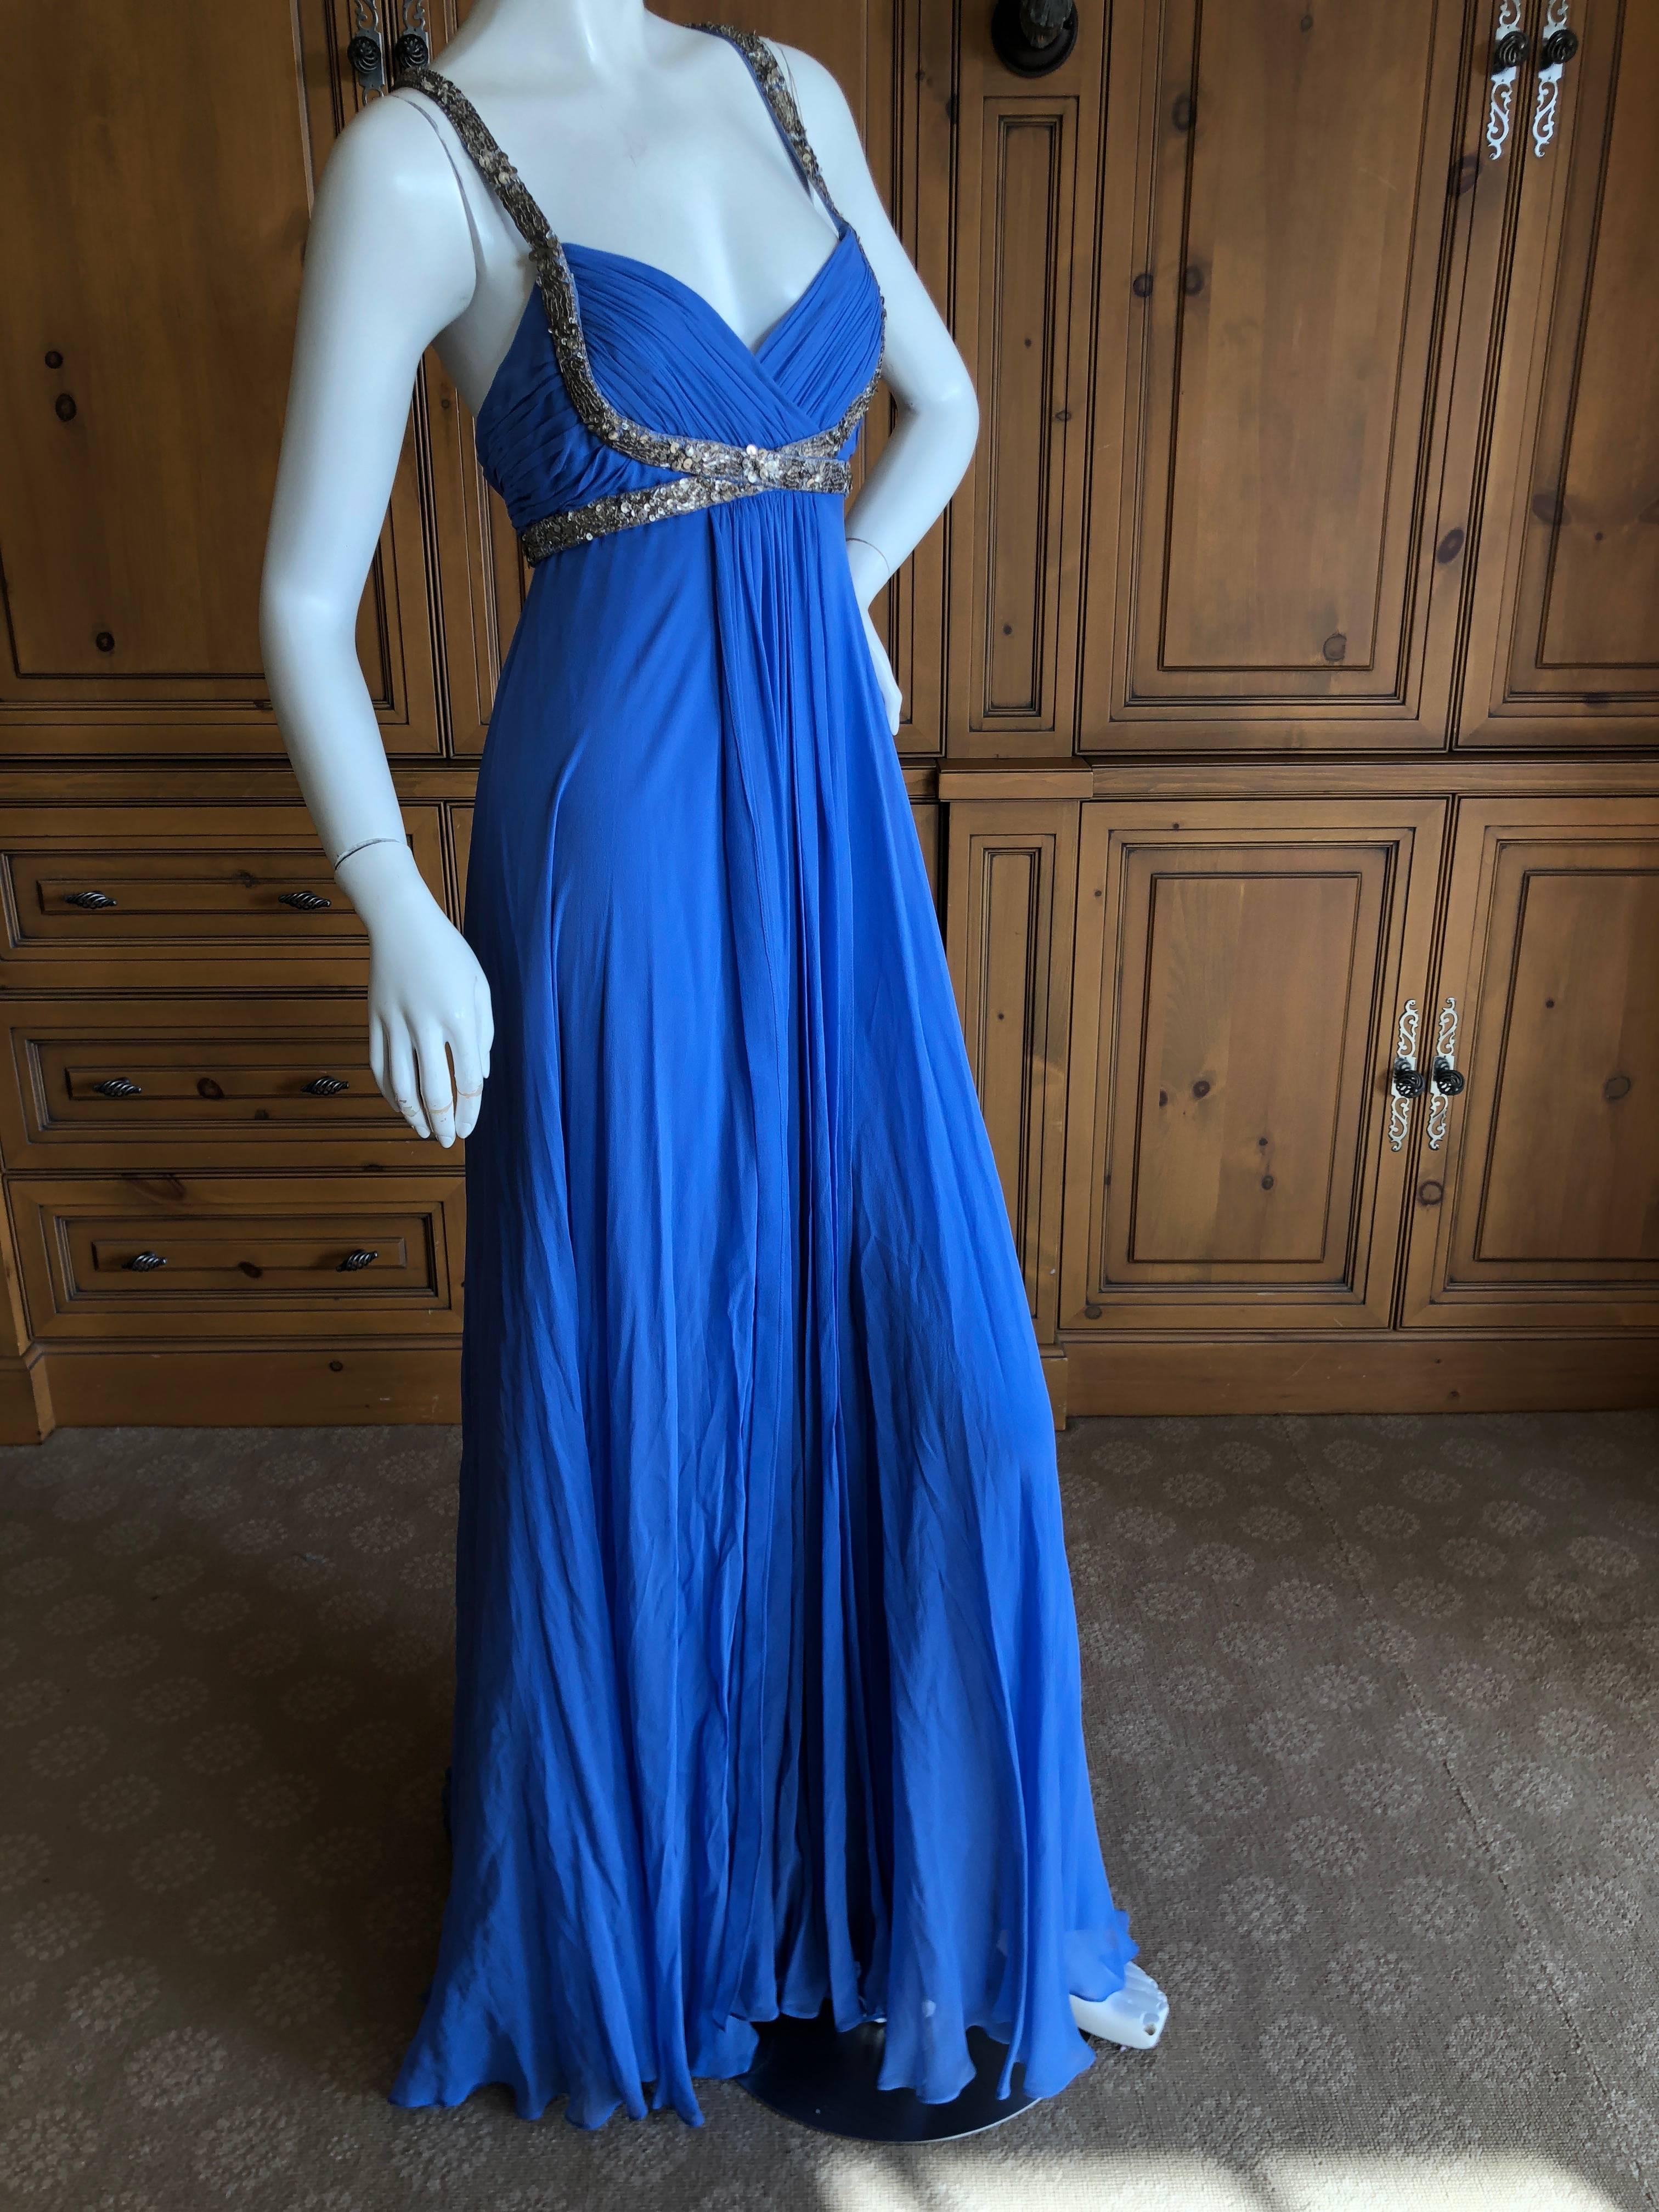 Marchesa Notte Silver Sequin Accented Blue Grecian Gown In Excellent Condition For Sale In Cloverdale, CA